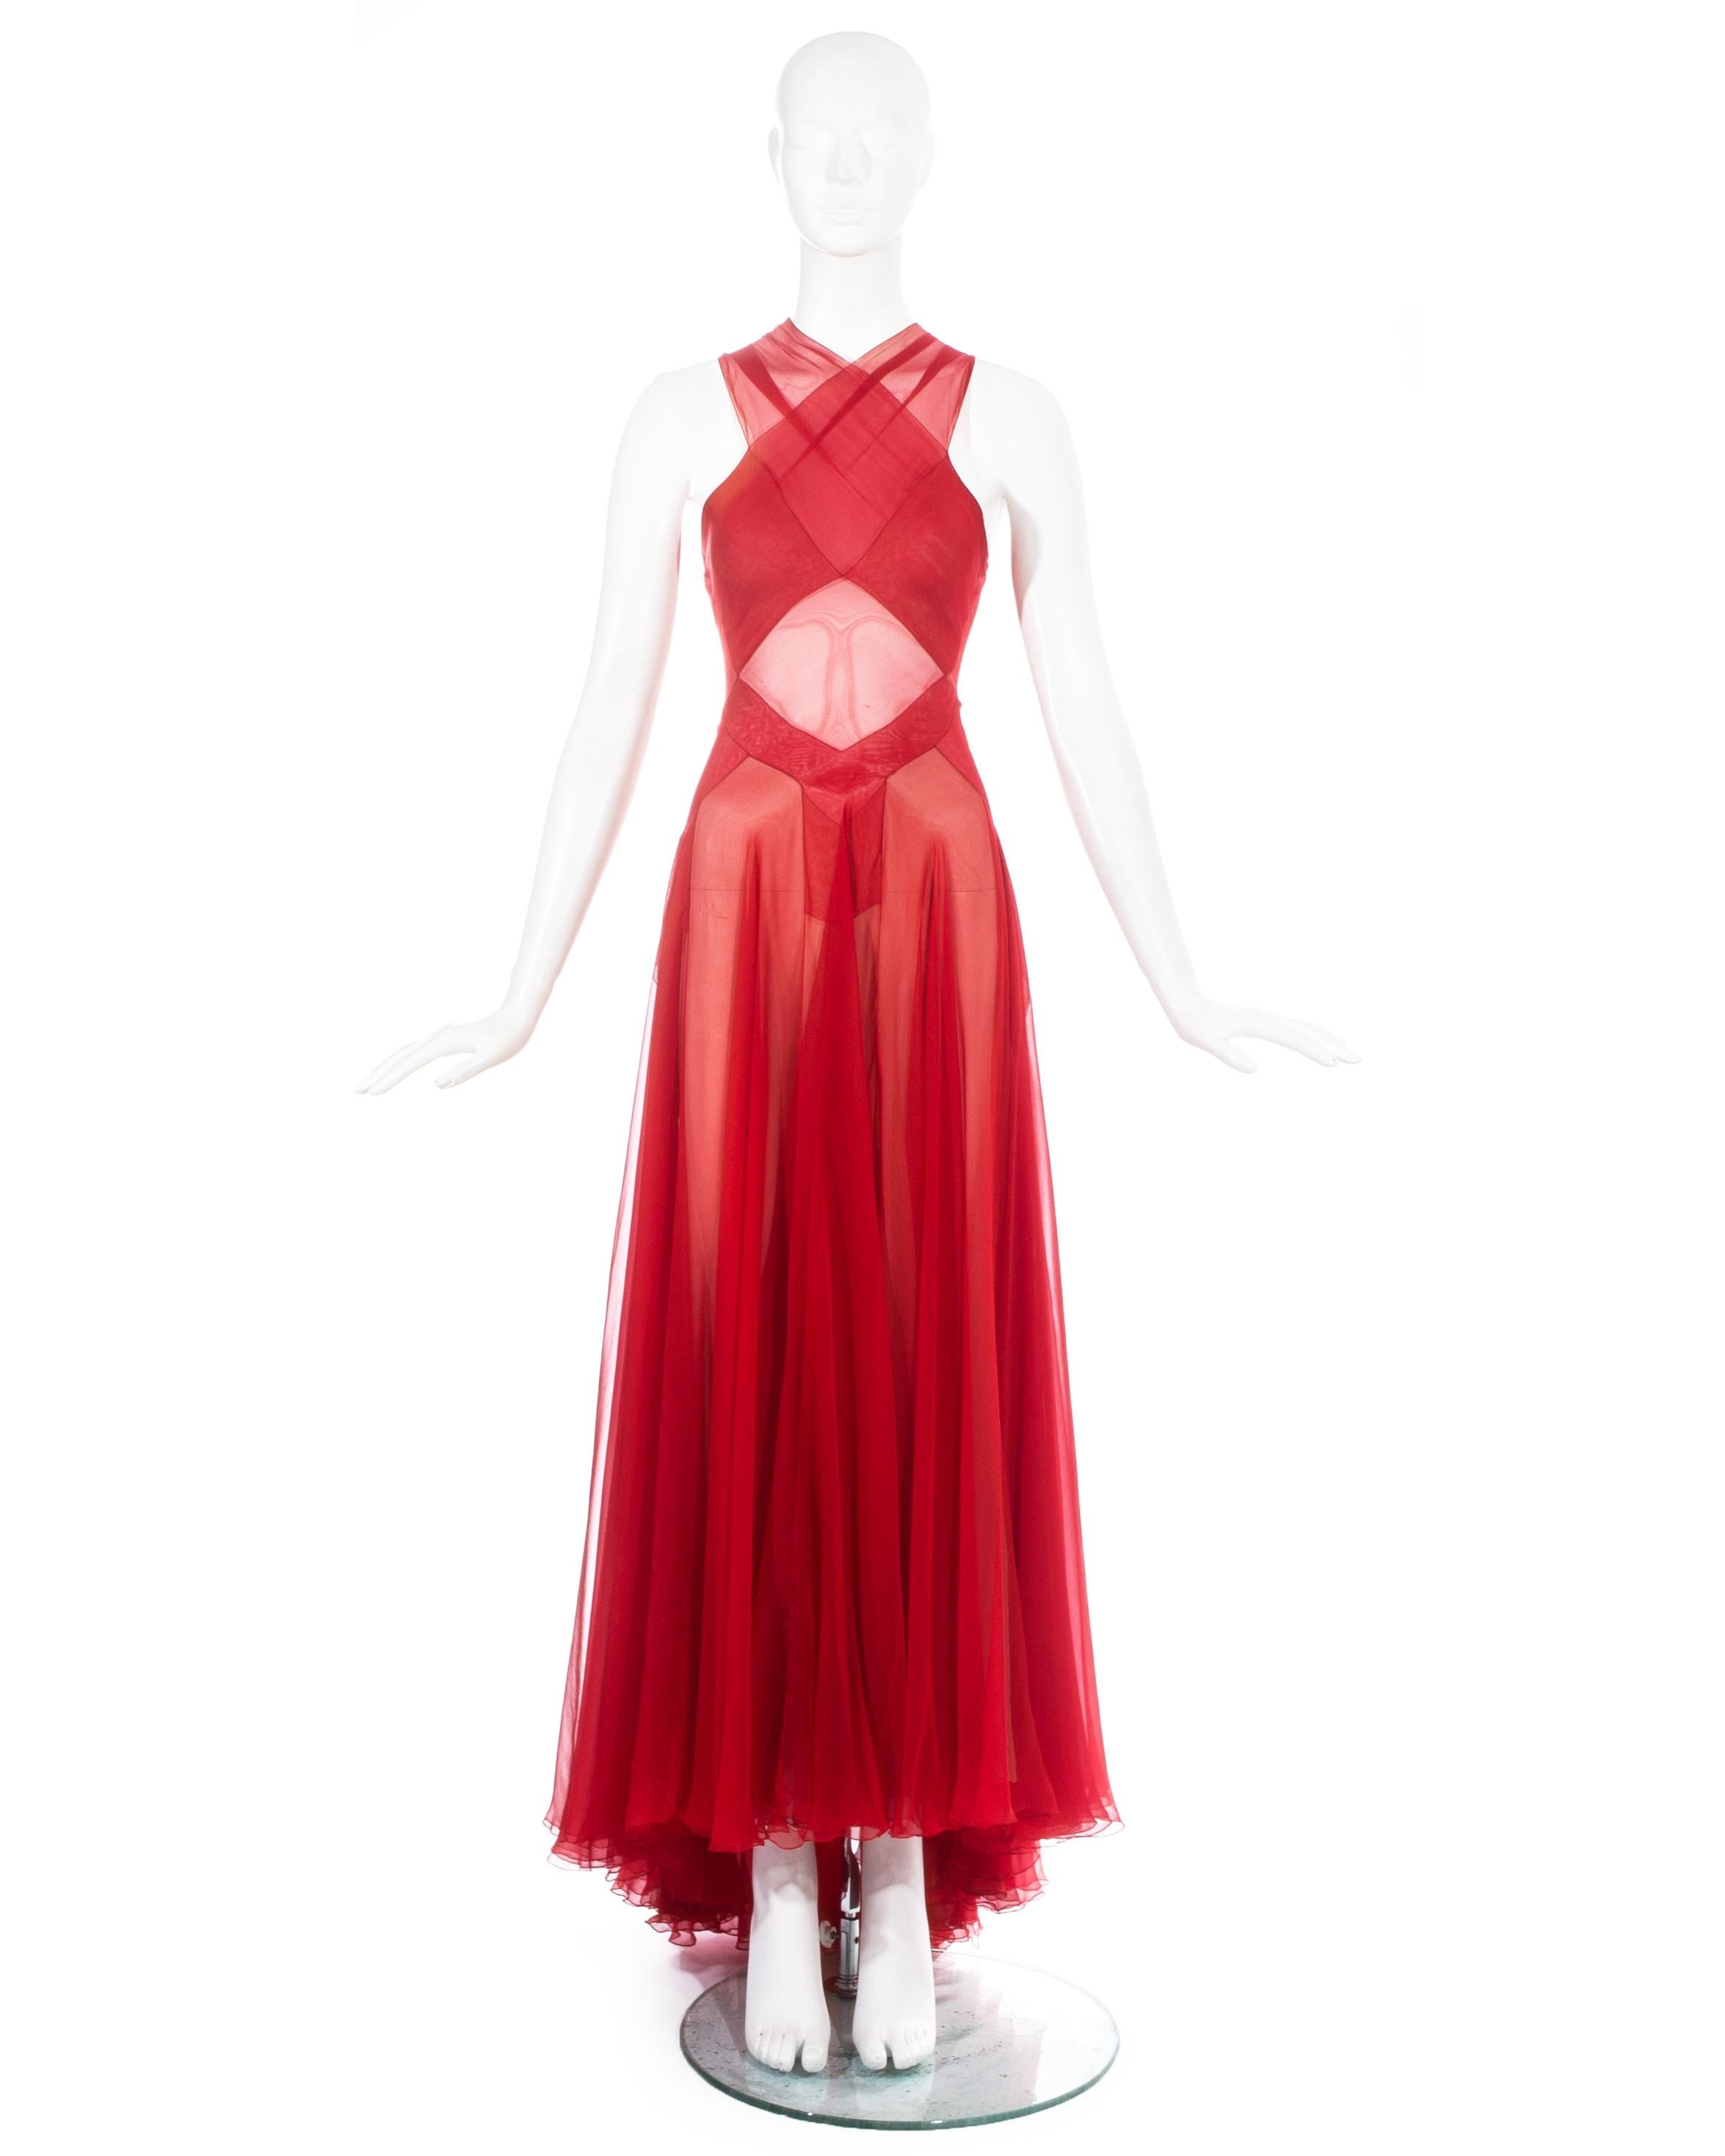 Azzedine Alaia Couture red silk evening dress. 

- Extremely rare design made for an exclusive Azzedine Alaia client in 1996 

c. 1996